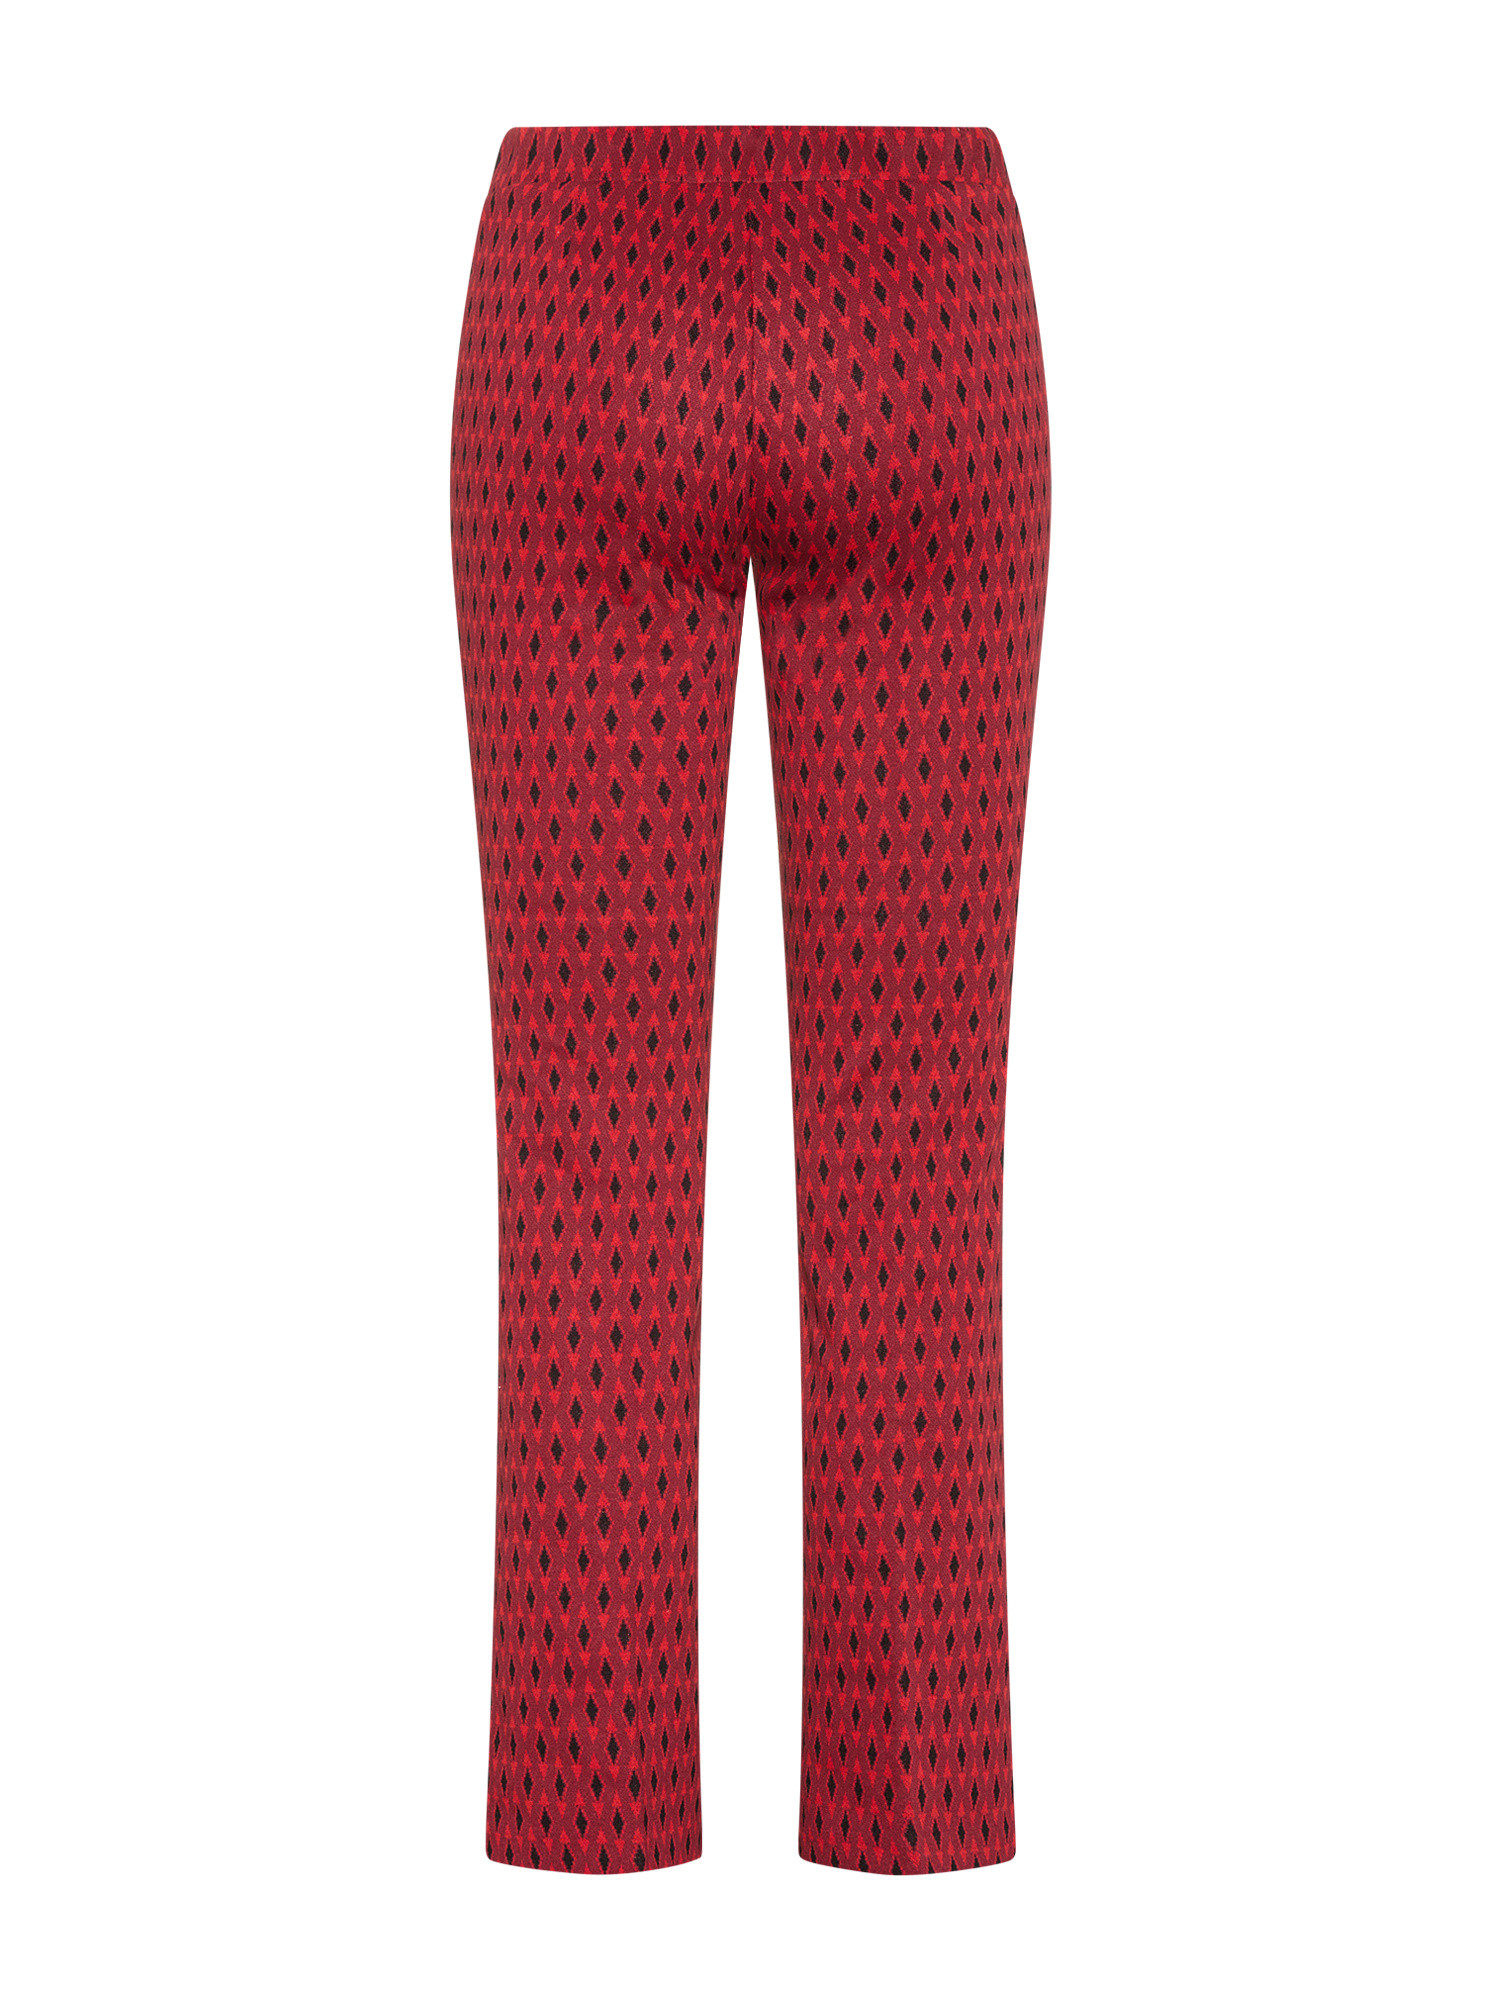 Koan - Flare trousers with diamond pattern, Red, large image number 1